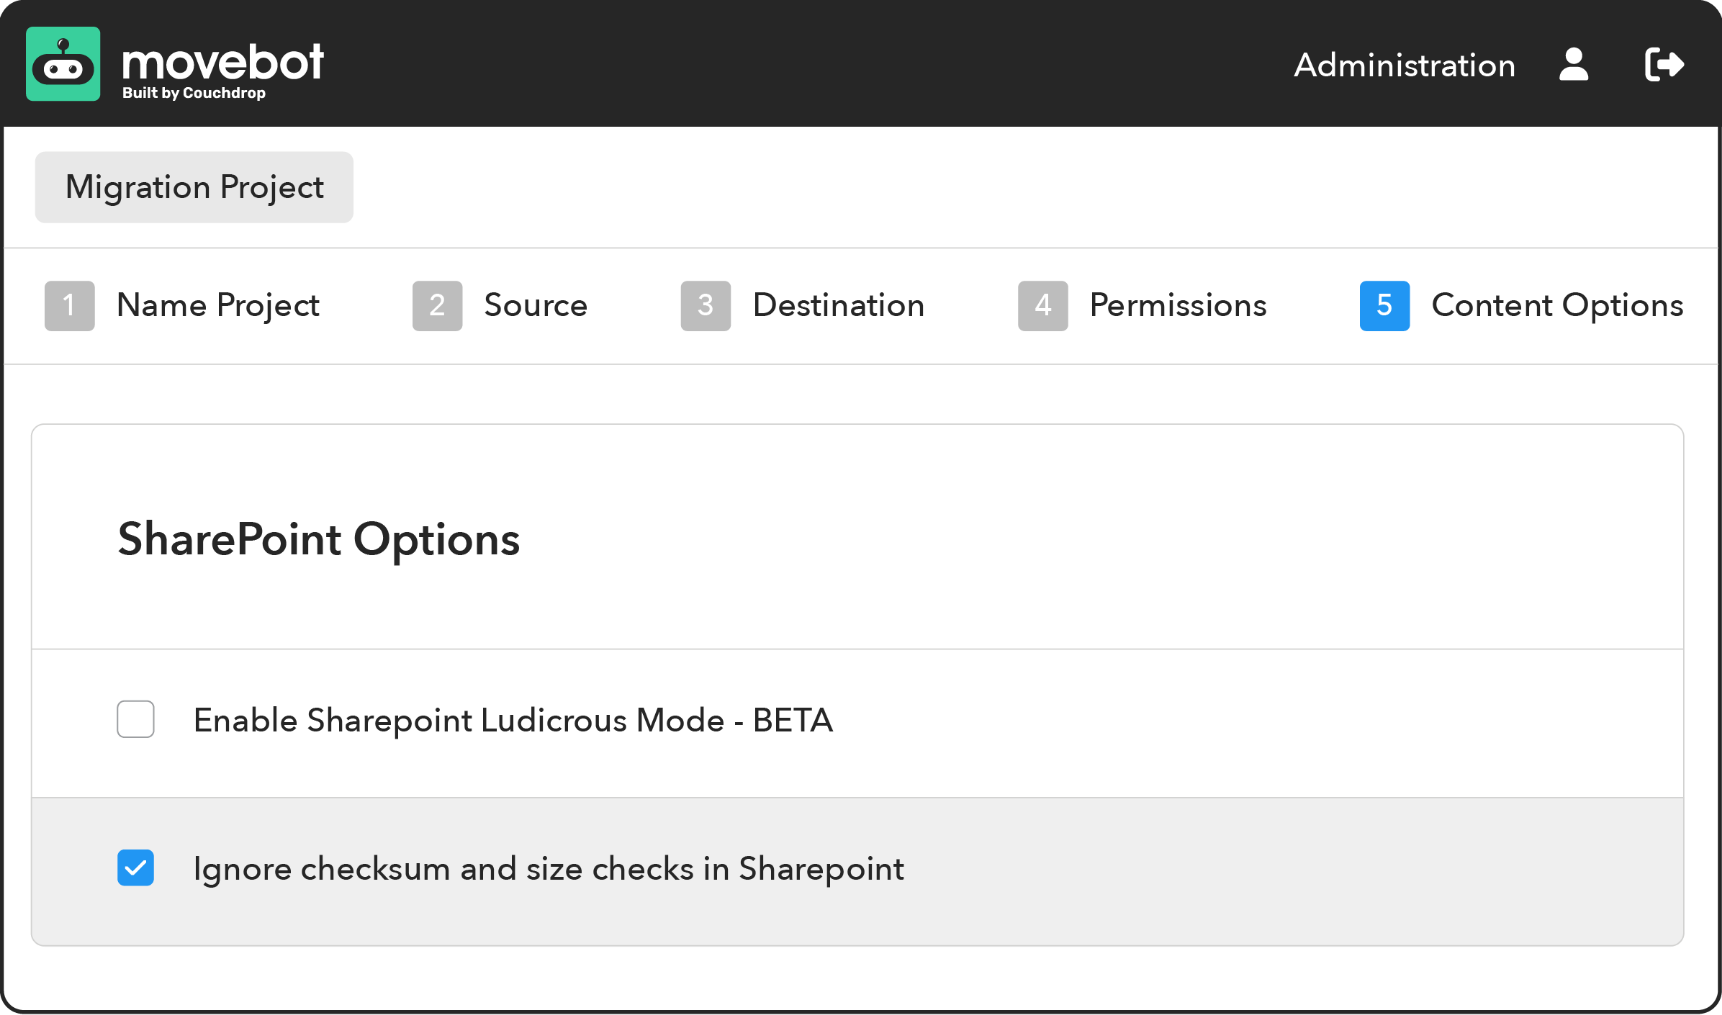 SharePoint options in Movebot